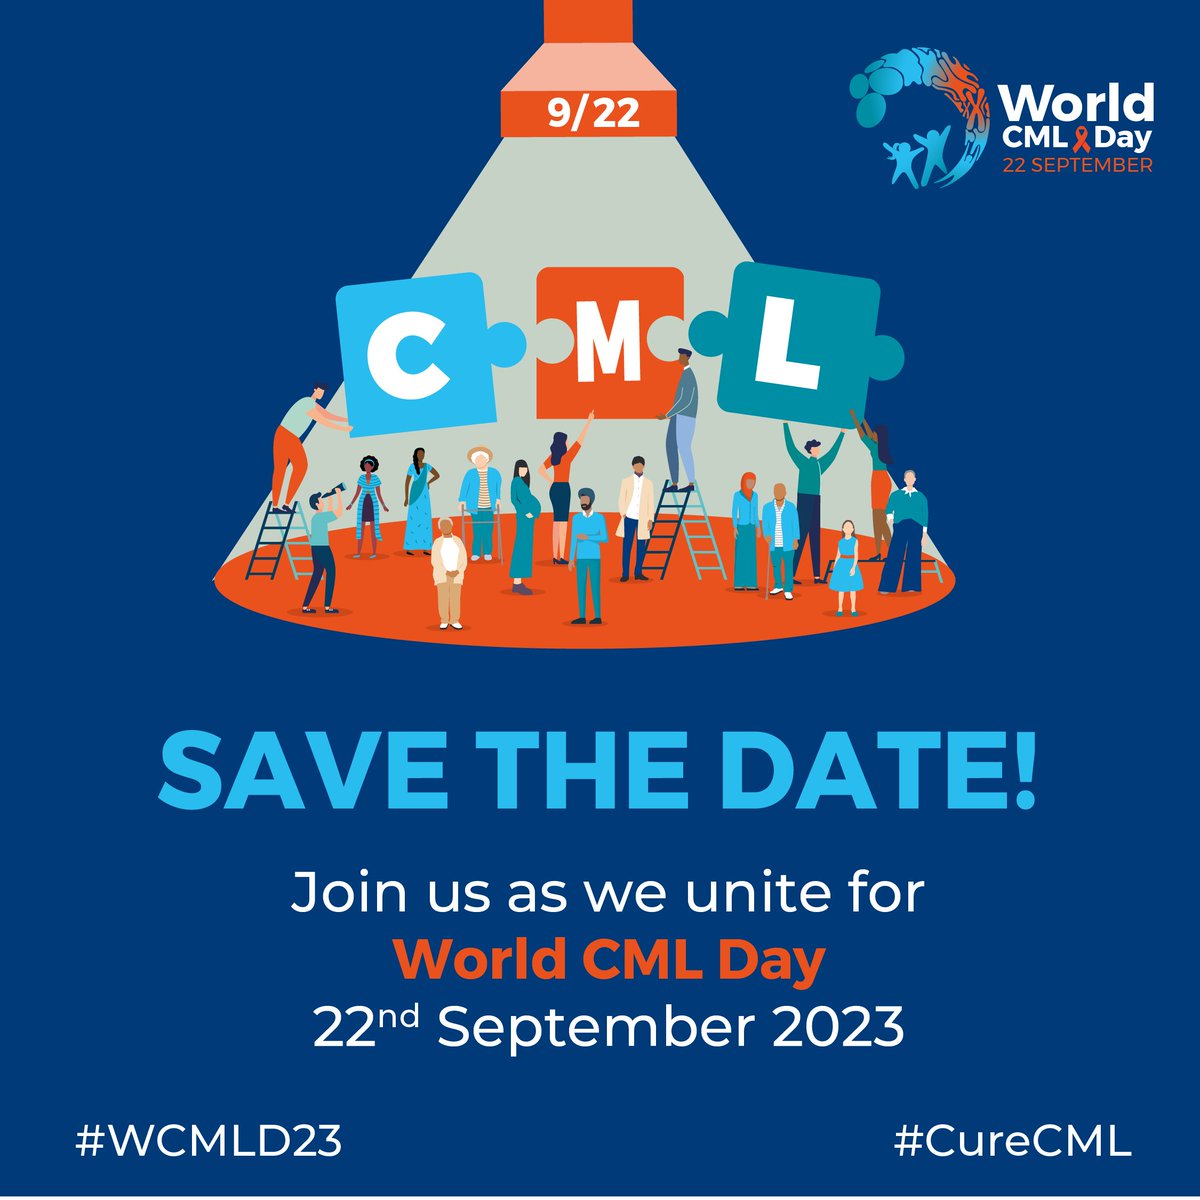 This World Chronic Myeloid Leukemia #WCMLD23 Day, let's honor the strength of those facing the 9-22 chromosome challenge. Together, we can rewrite the story of CML.
#WorldCMLDay
#wcmld23
#curecml
#cmlawarenessmonth
#Chronicmyeloidleukemia